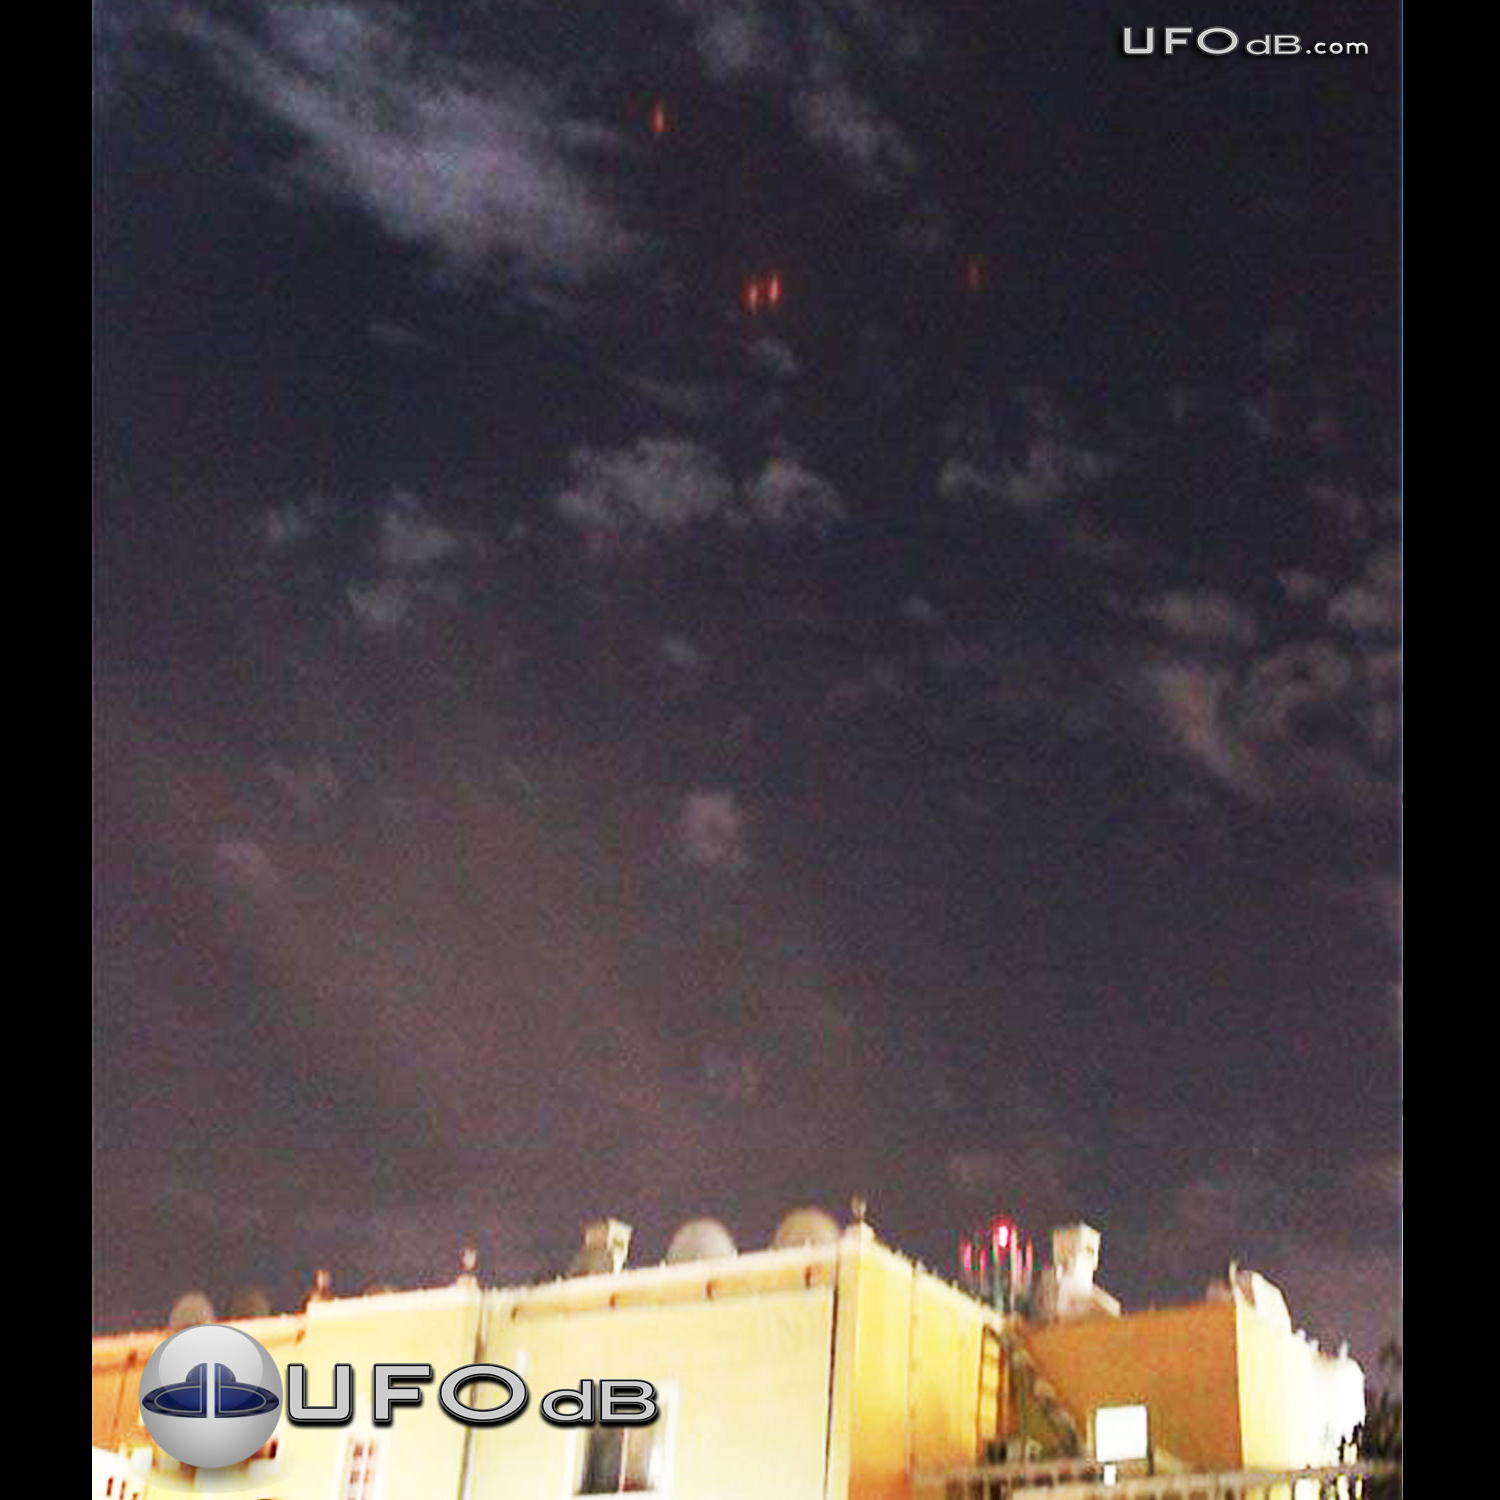 Light Pillars UFOs seen as Heavenly Signs in Bahrain | March 18 2011 UFO Picture #318-1